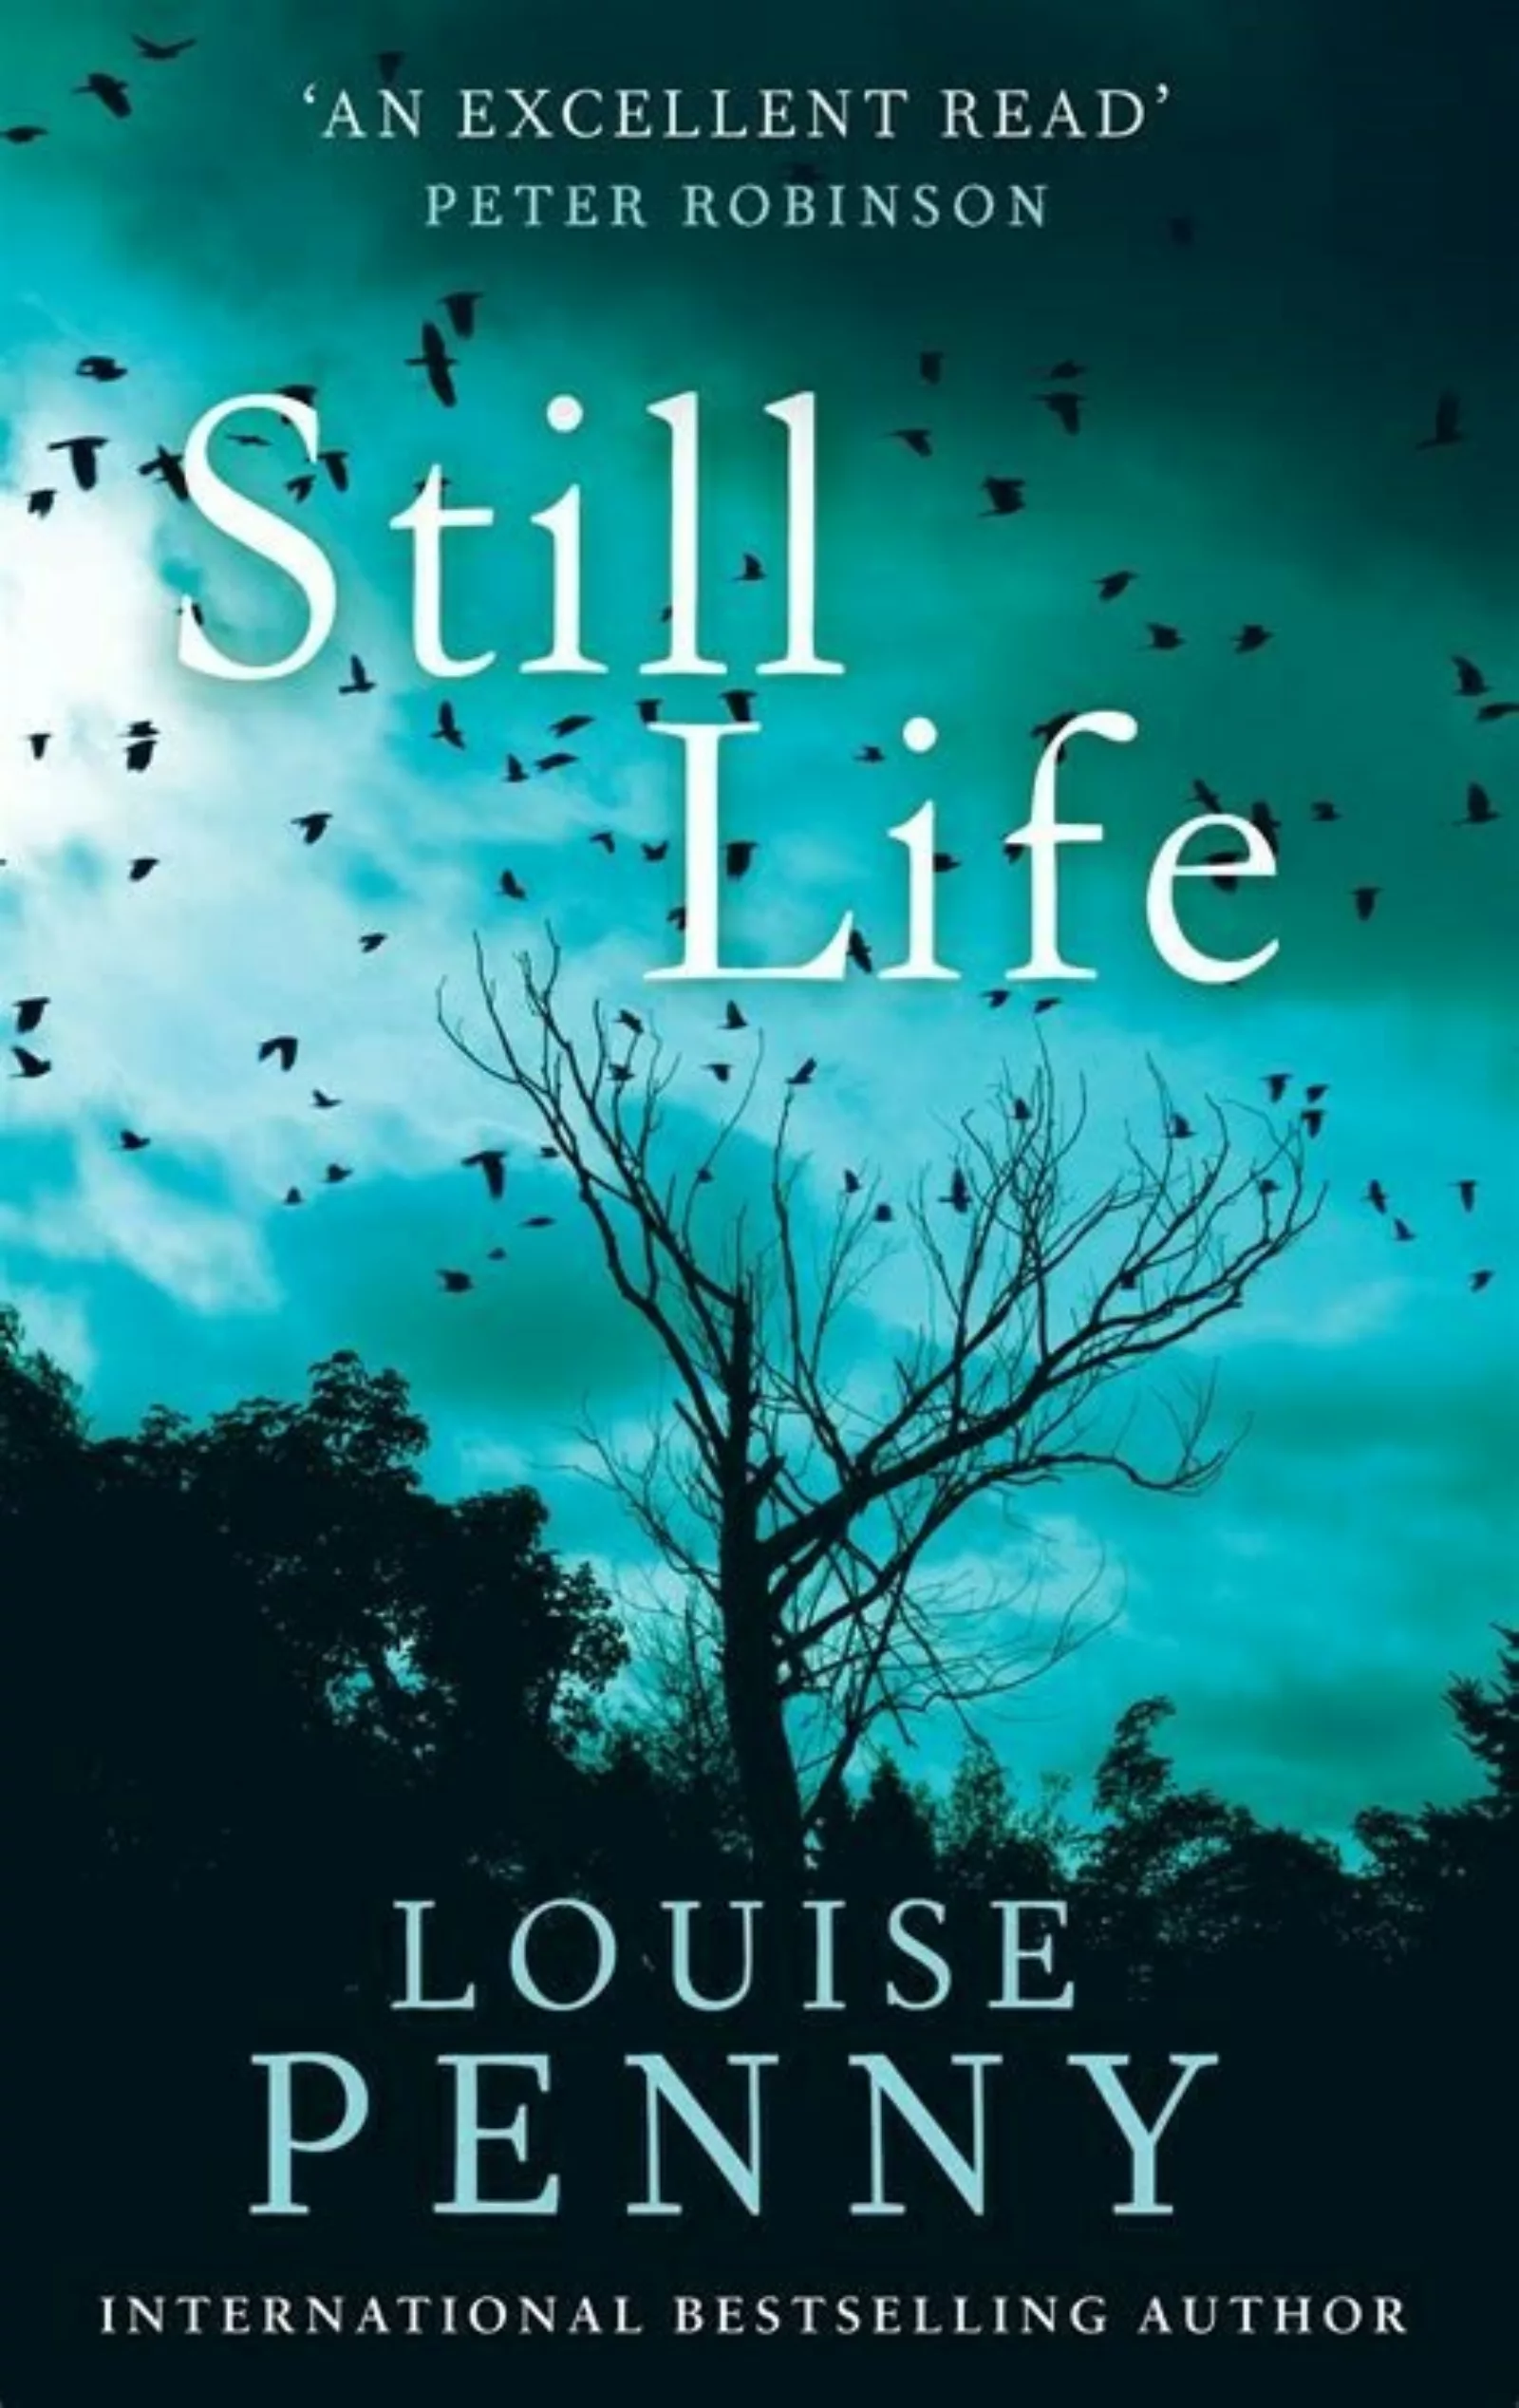 List of Books by Louise Penny